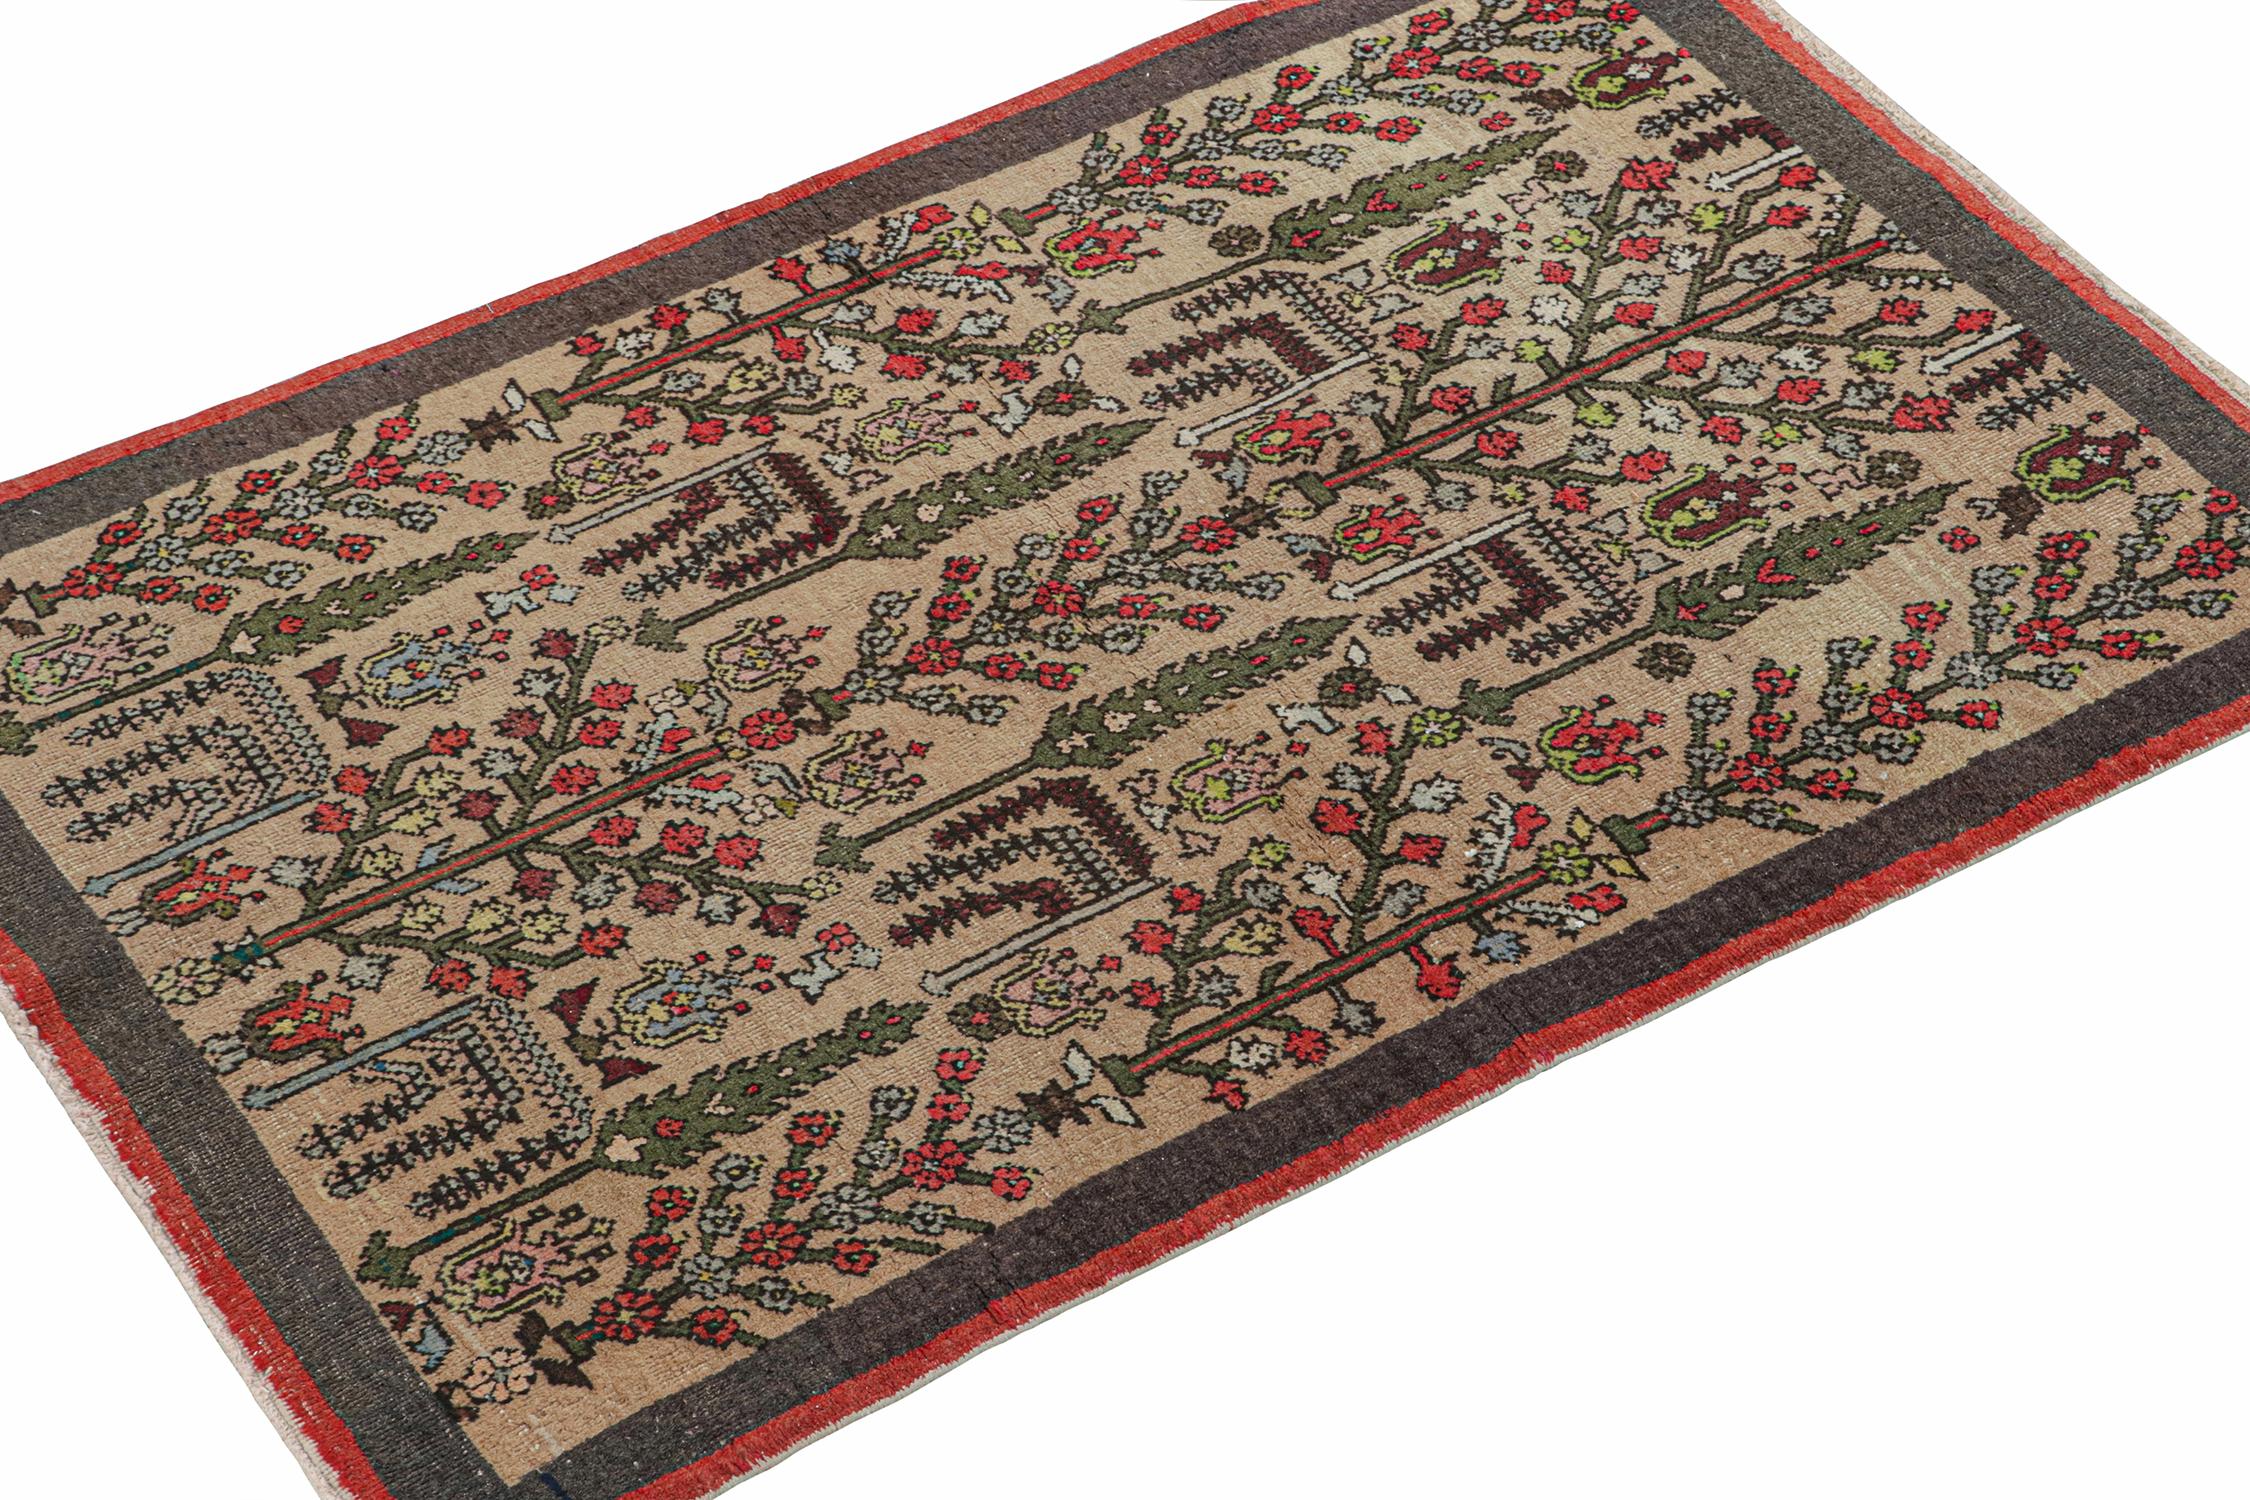 Turkish Vintage Runner in Beige with Green and Red Floral Patterns by Rug & Kilim For Sale